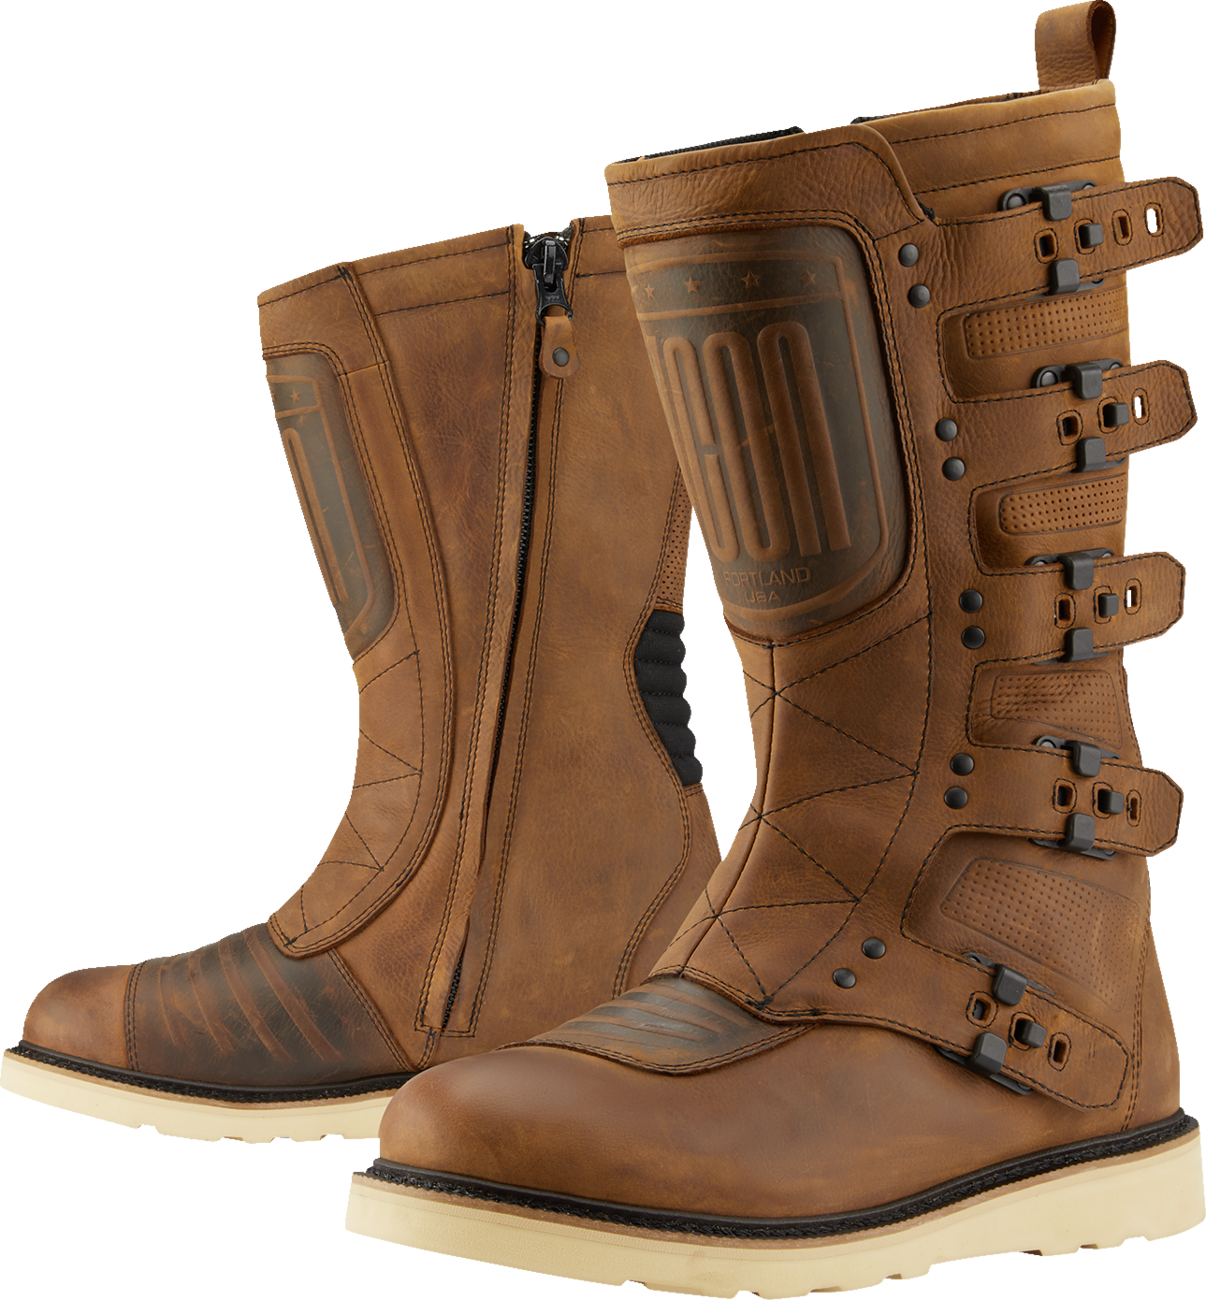 ICON Elsinore 2™ Boots - Brown - Size 10 3403-1142